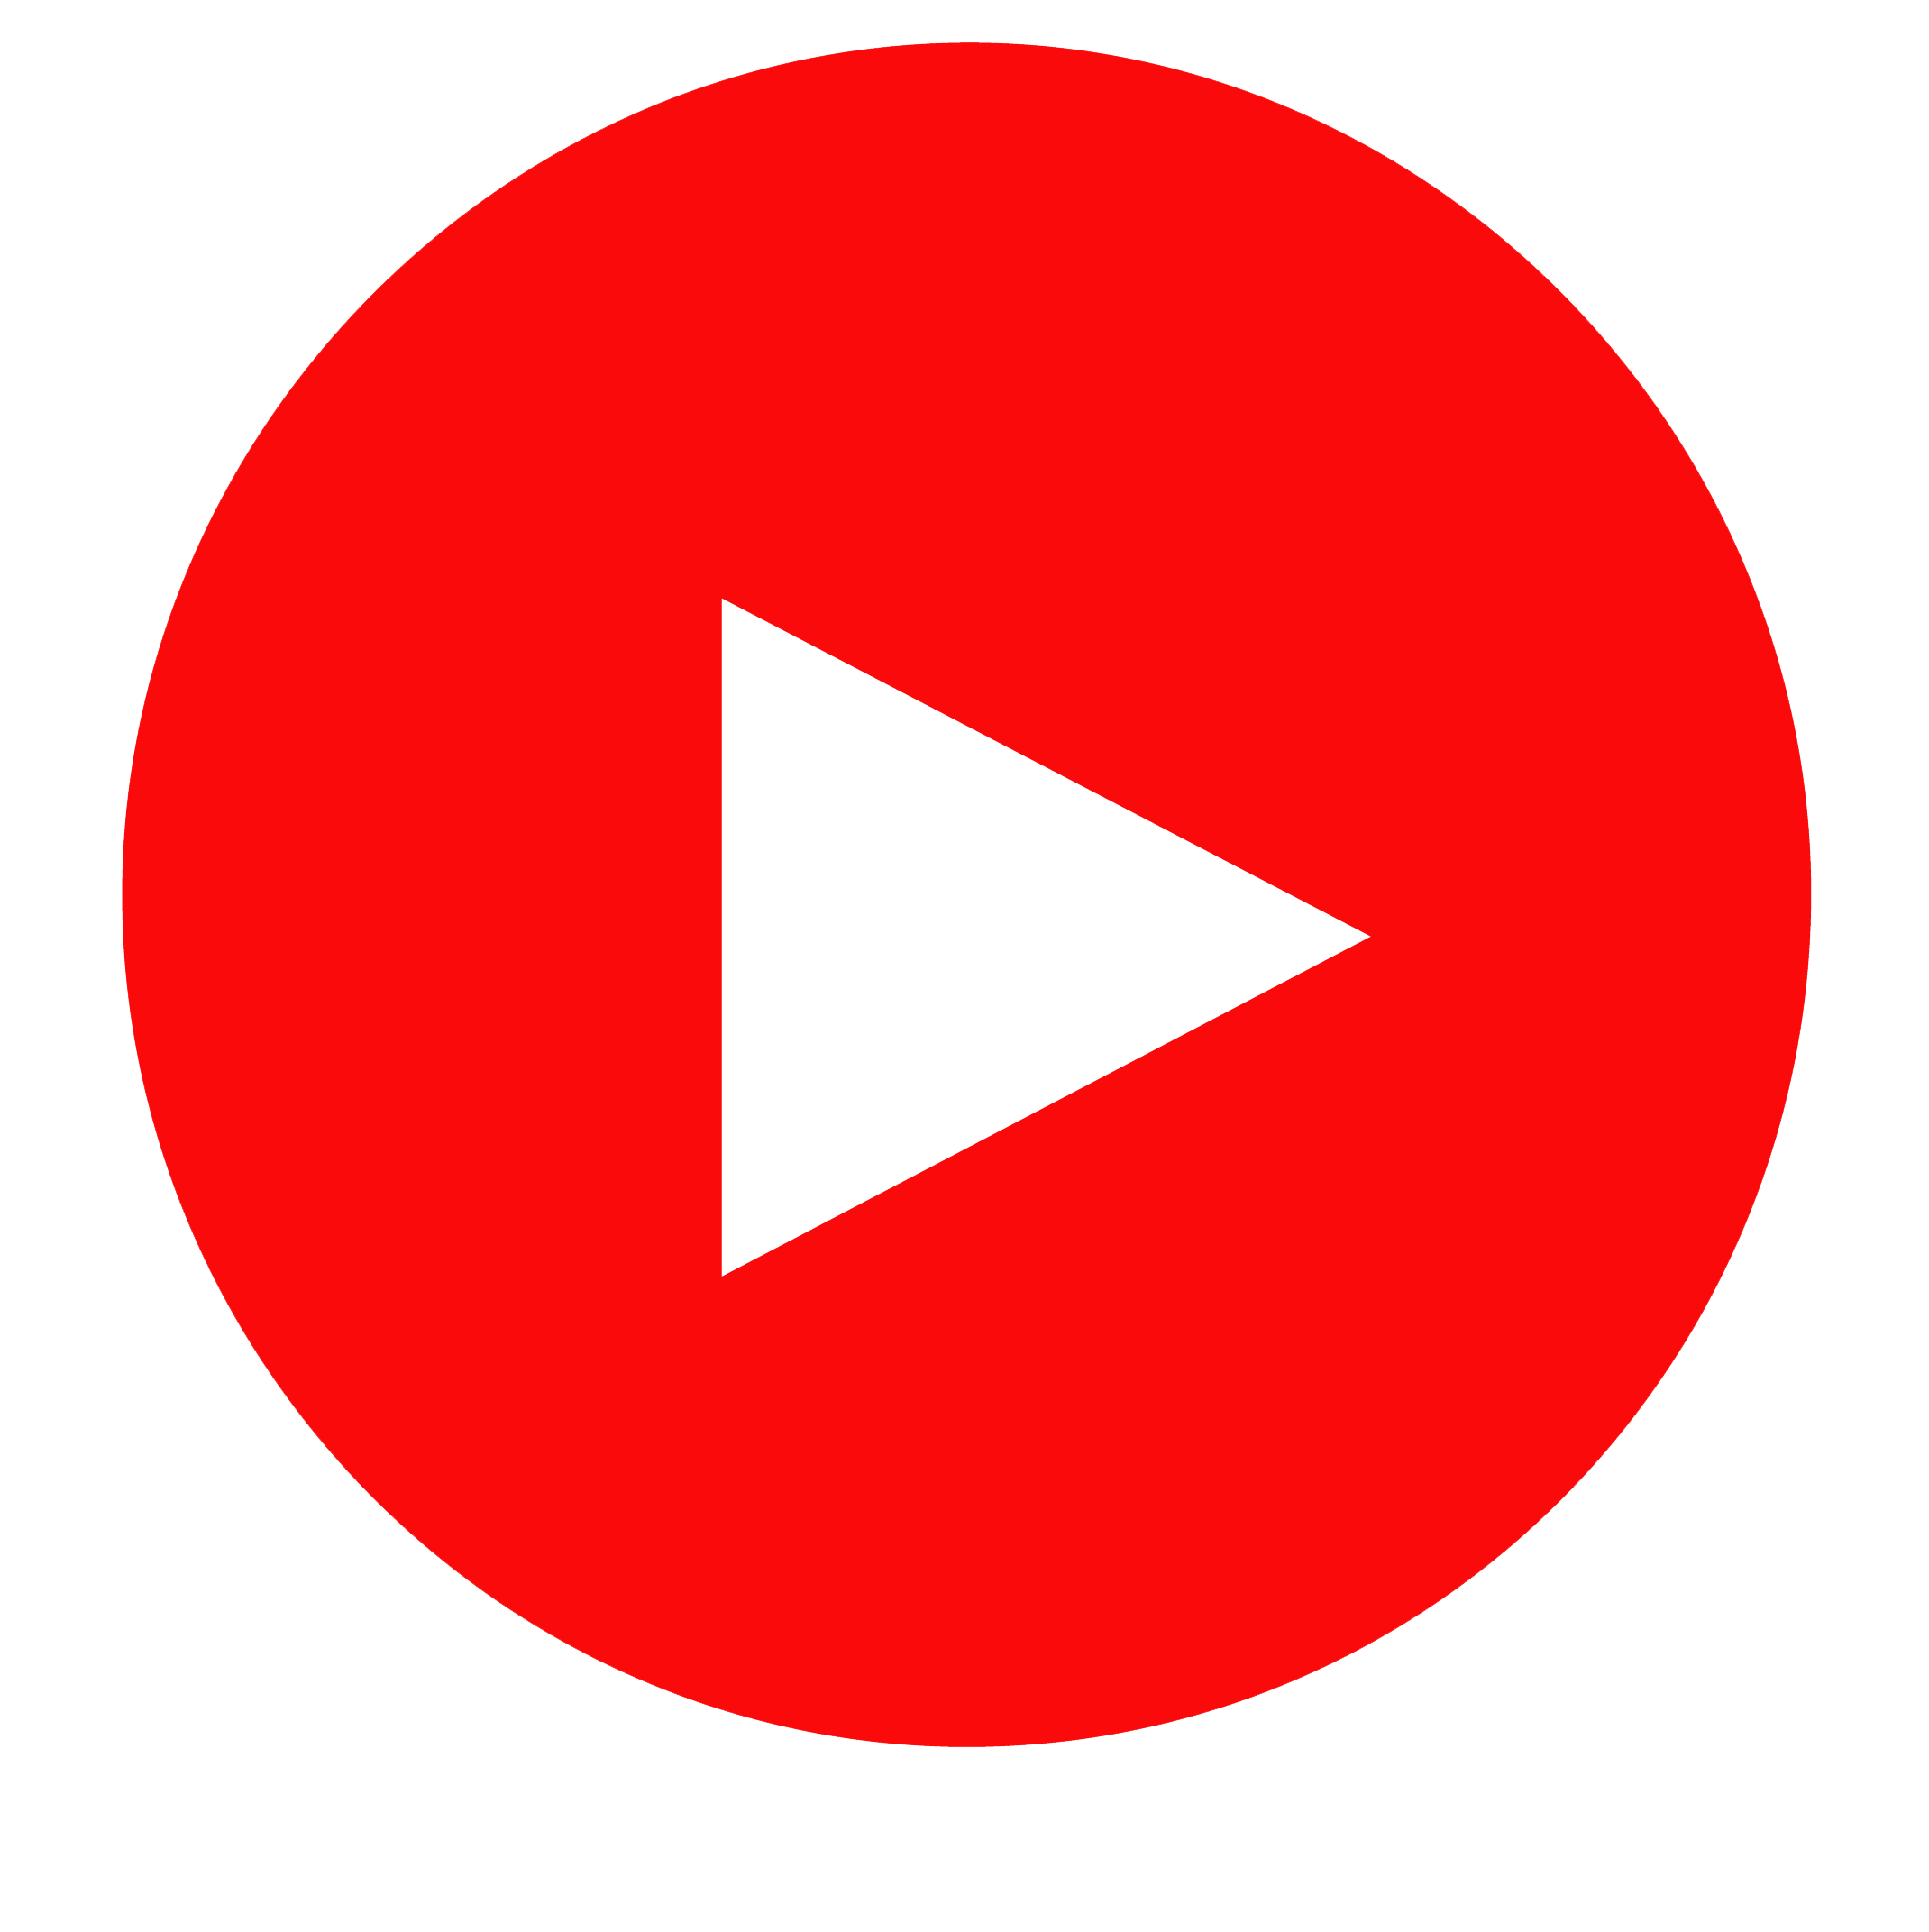 Youtube кнопка PNG